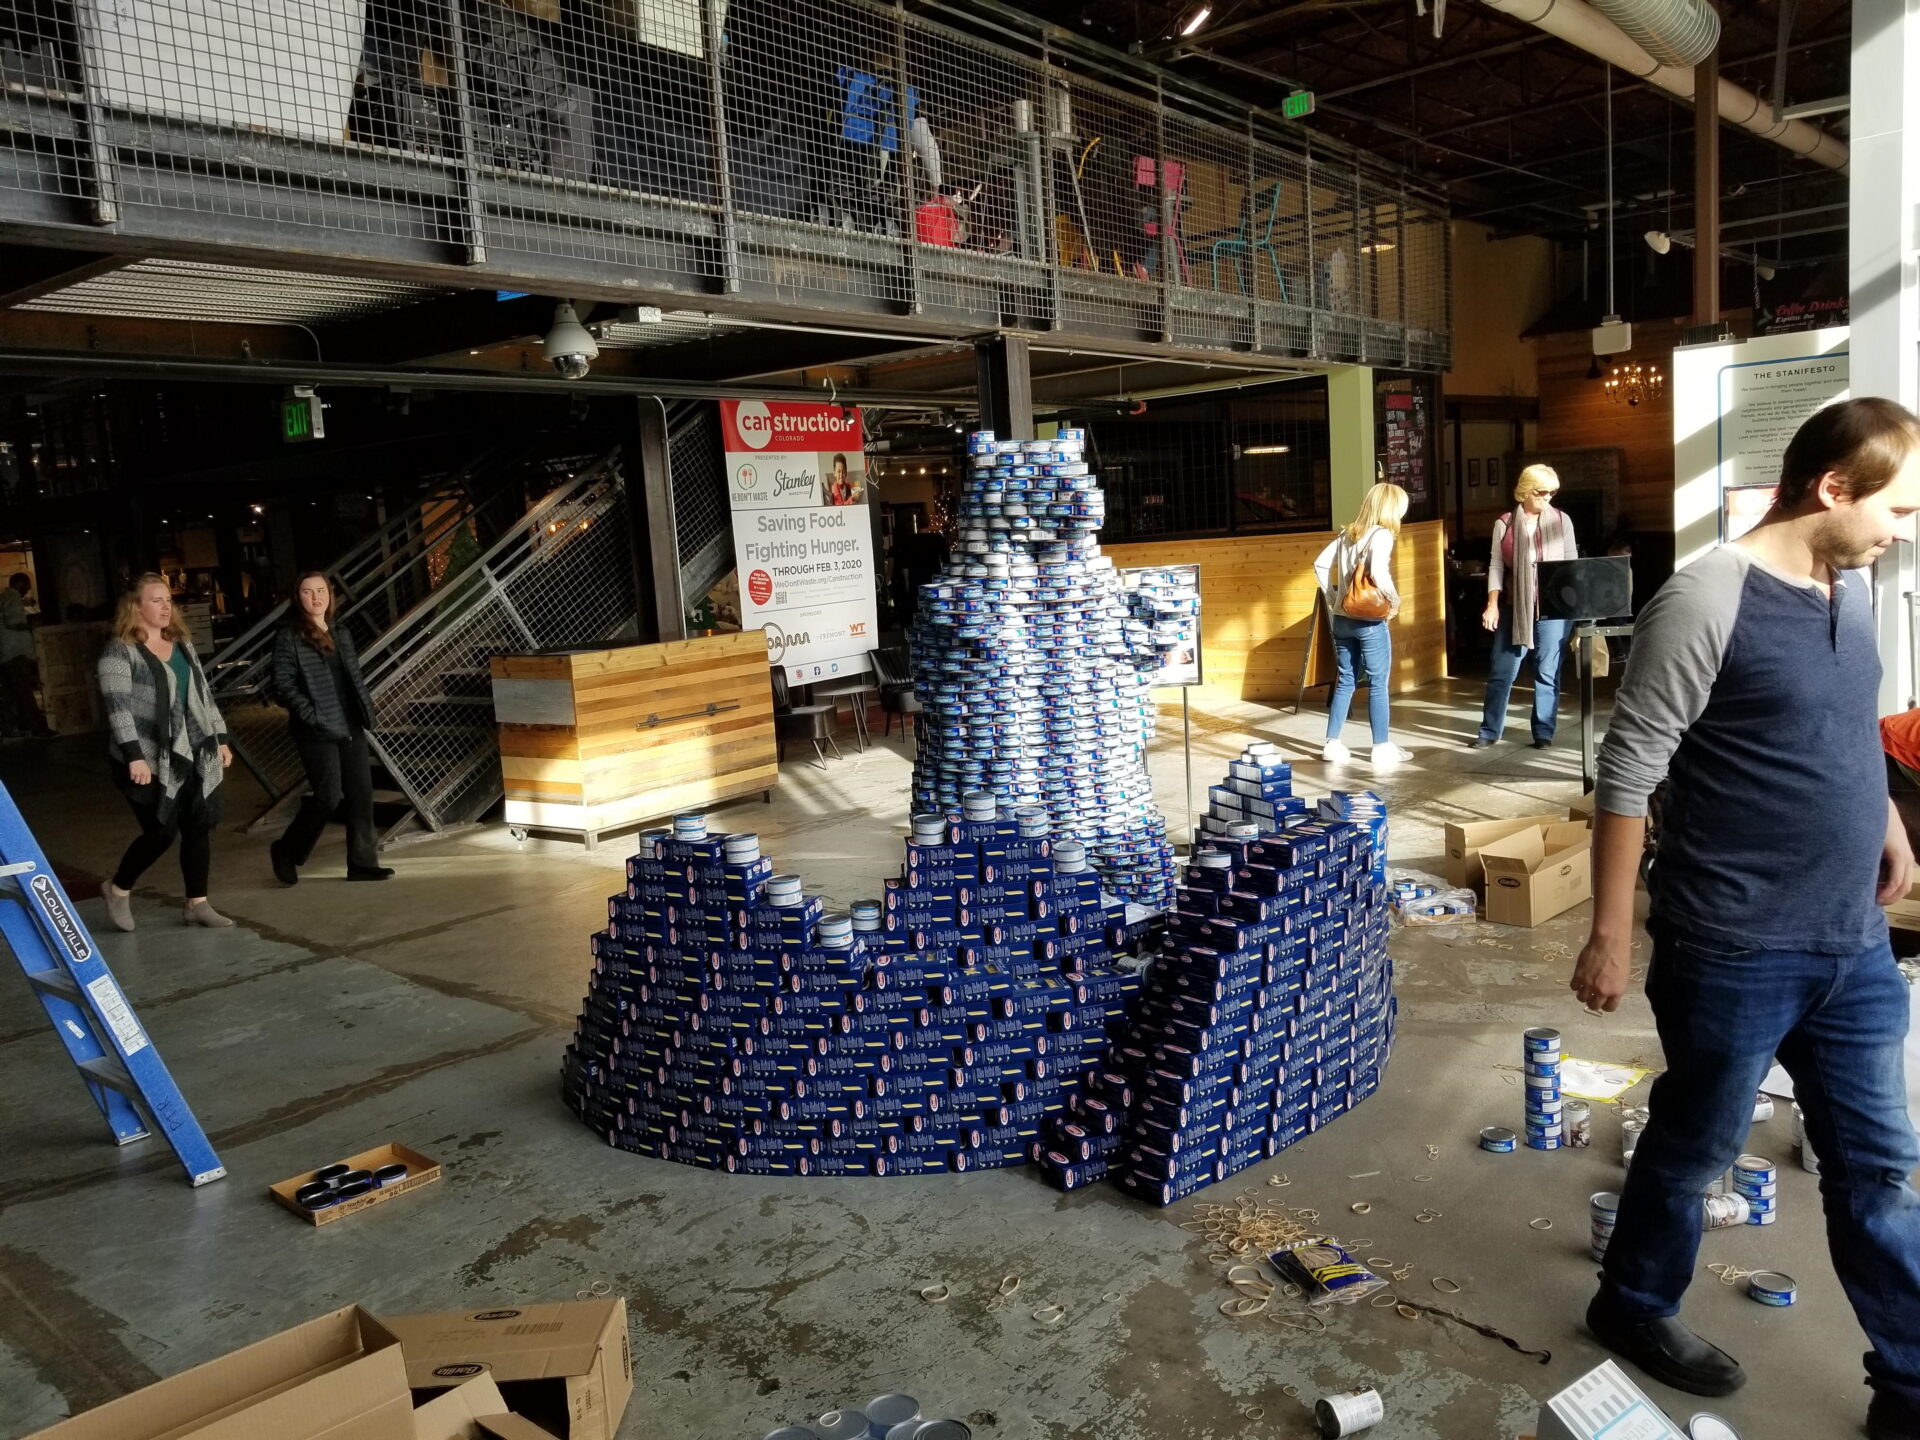 CANStruction 3